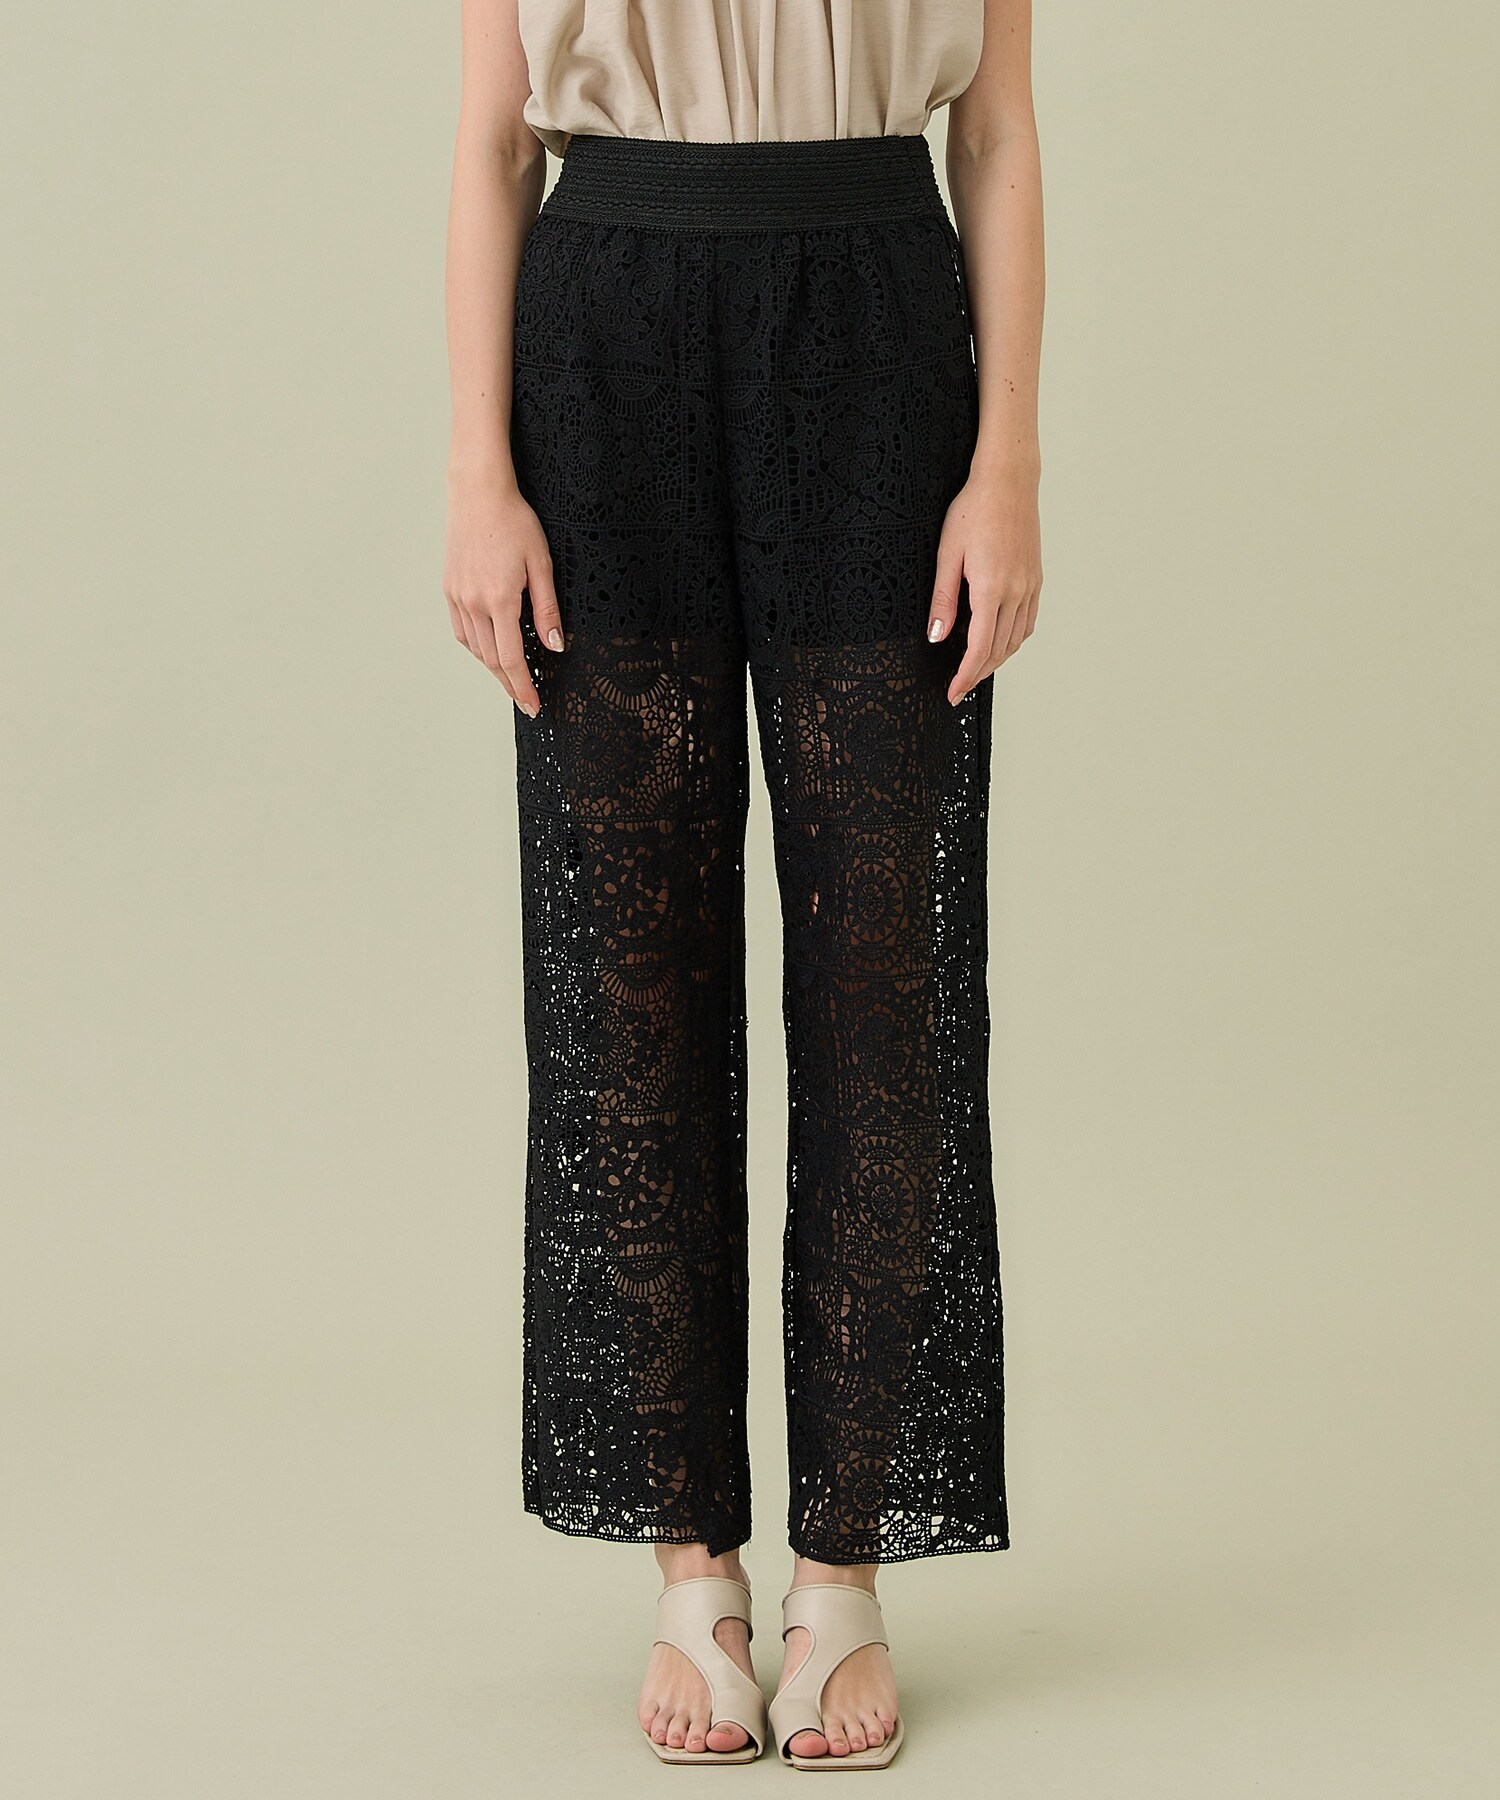 BLOCK LACE STRAIGHT PANTS | boydstreeservices.com